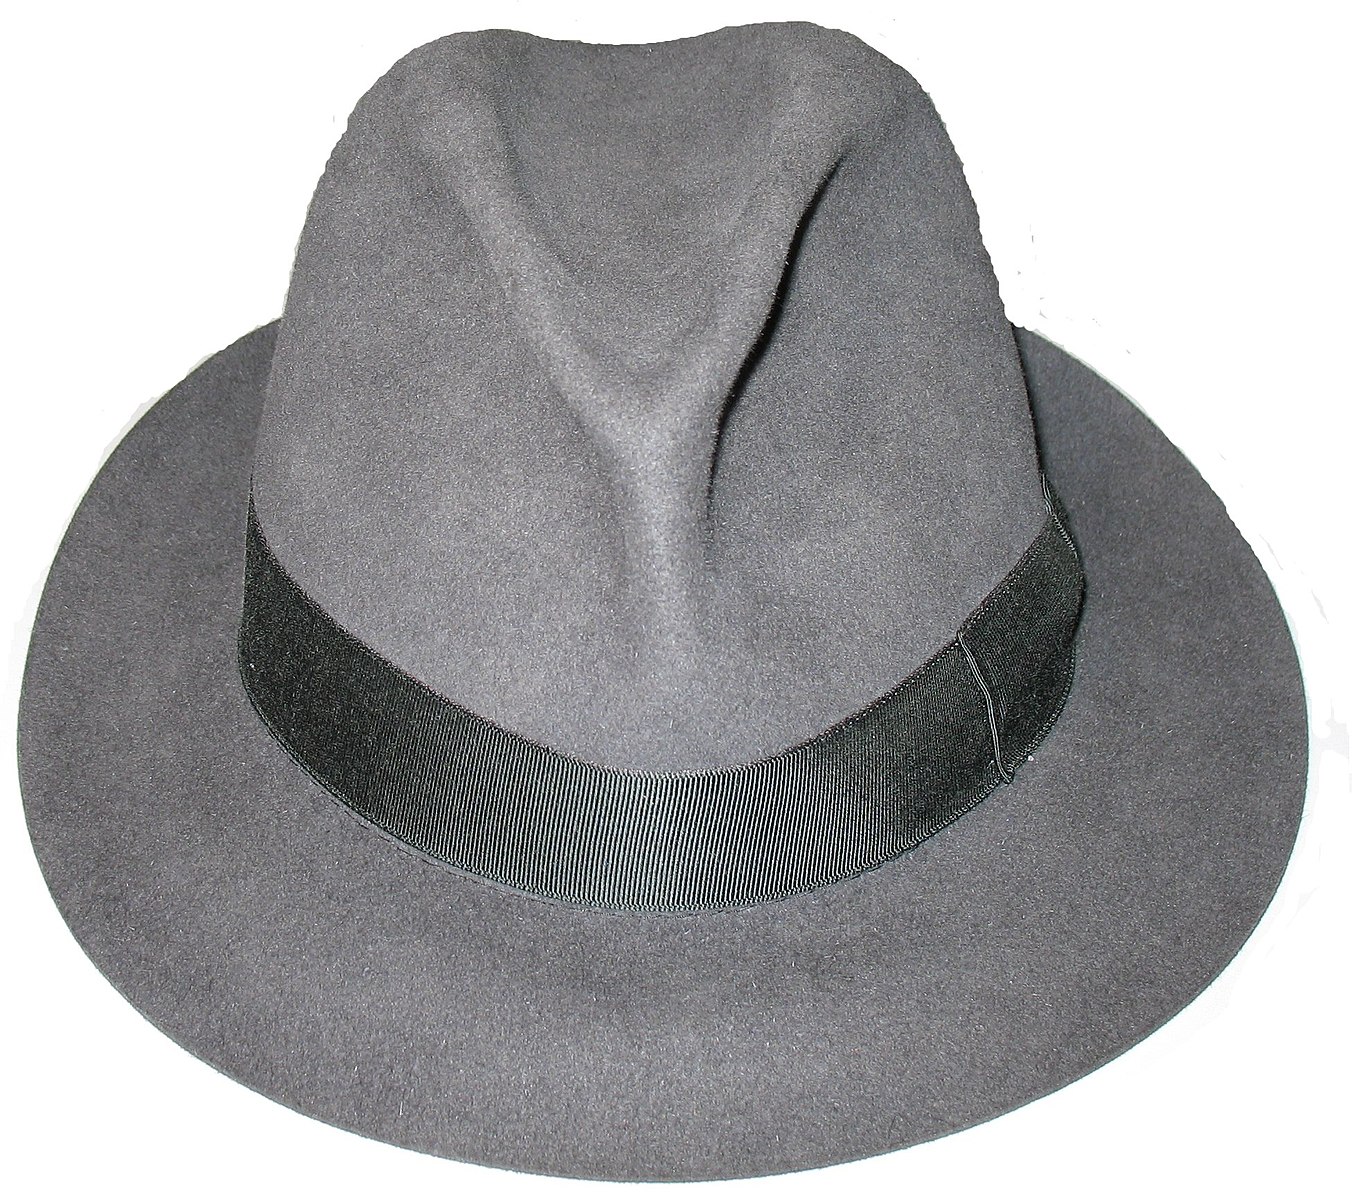 Difference Between Fedora and Homburg